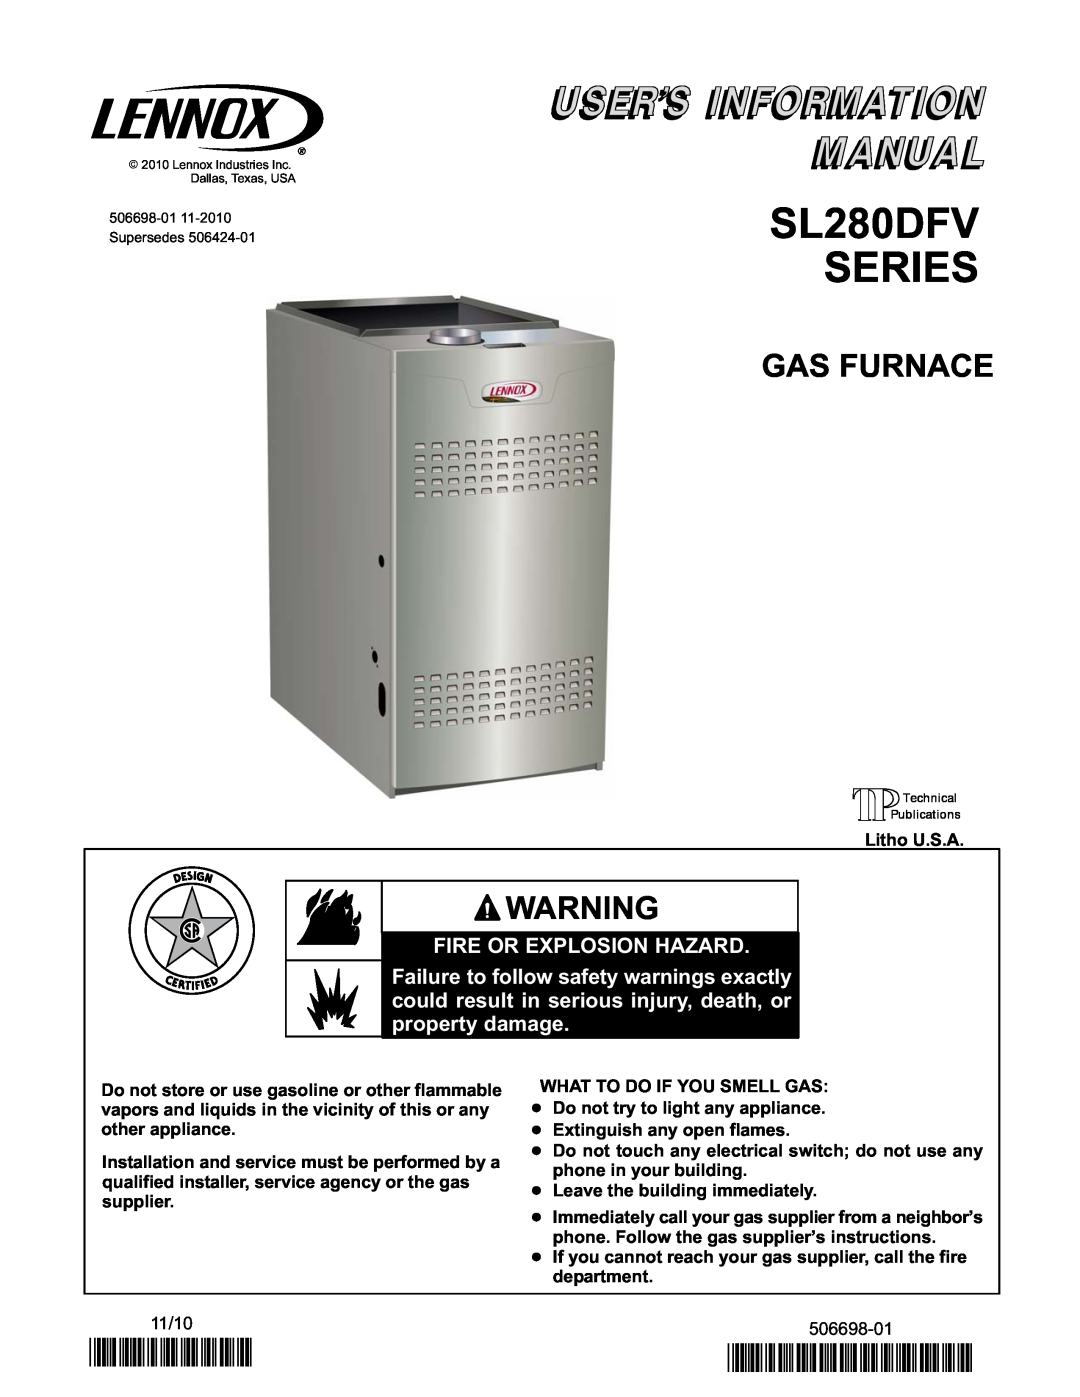 Lennox International Inc DAVE LENNOX SIGNATURE COLLECTION GAS FURNACE installation instructions Table of Contents, 2P0611 